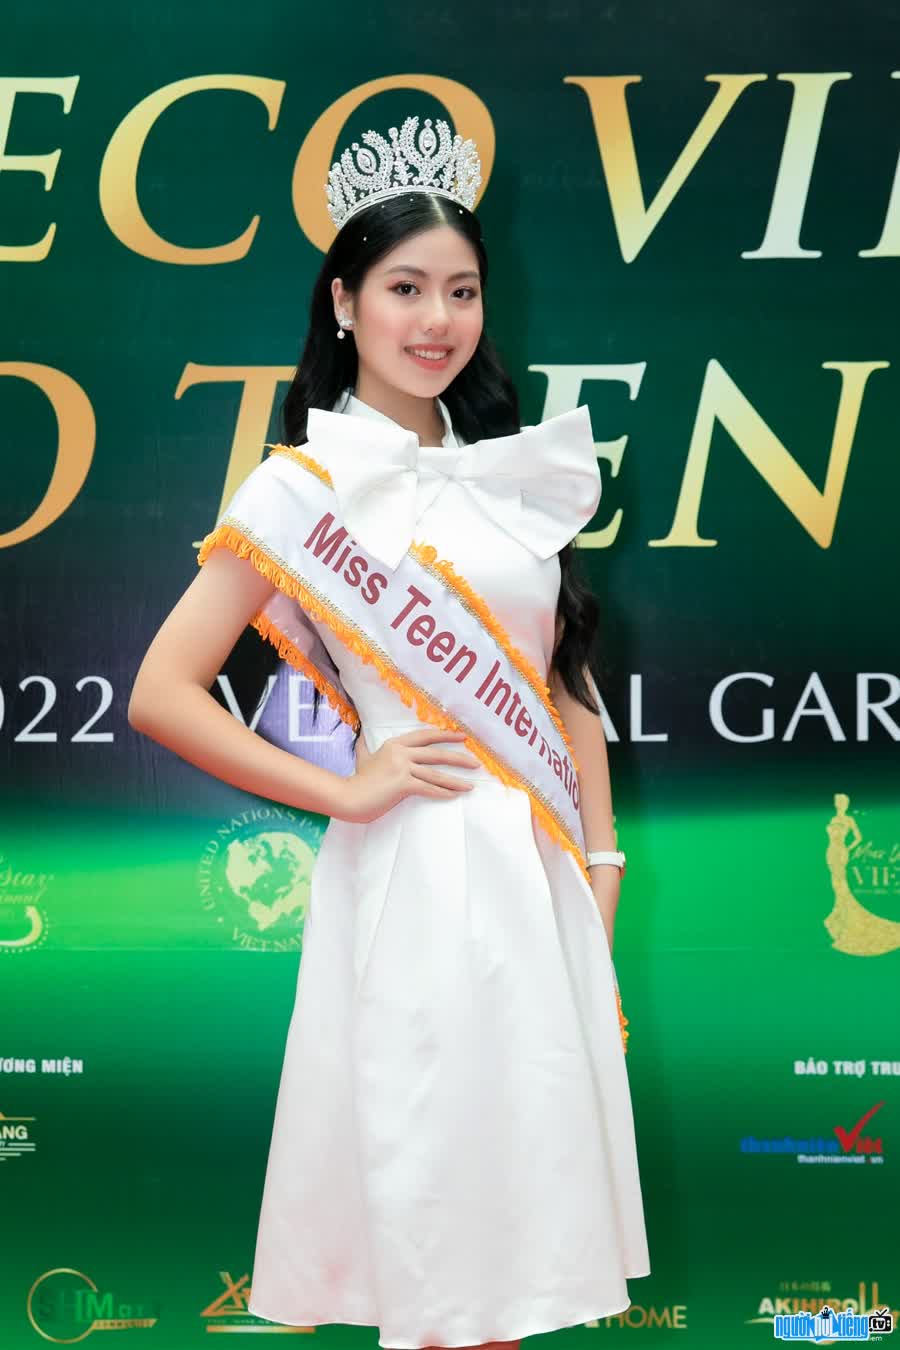 Ngo Ngoc Gia Han is the representative of Vietnam to participate in Miss Teen International contest